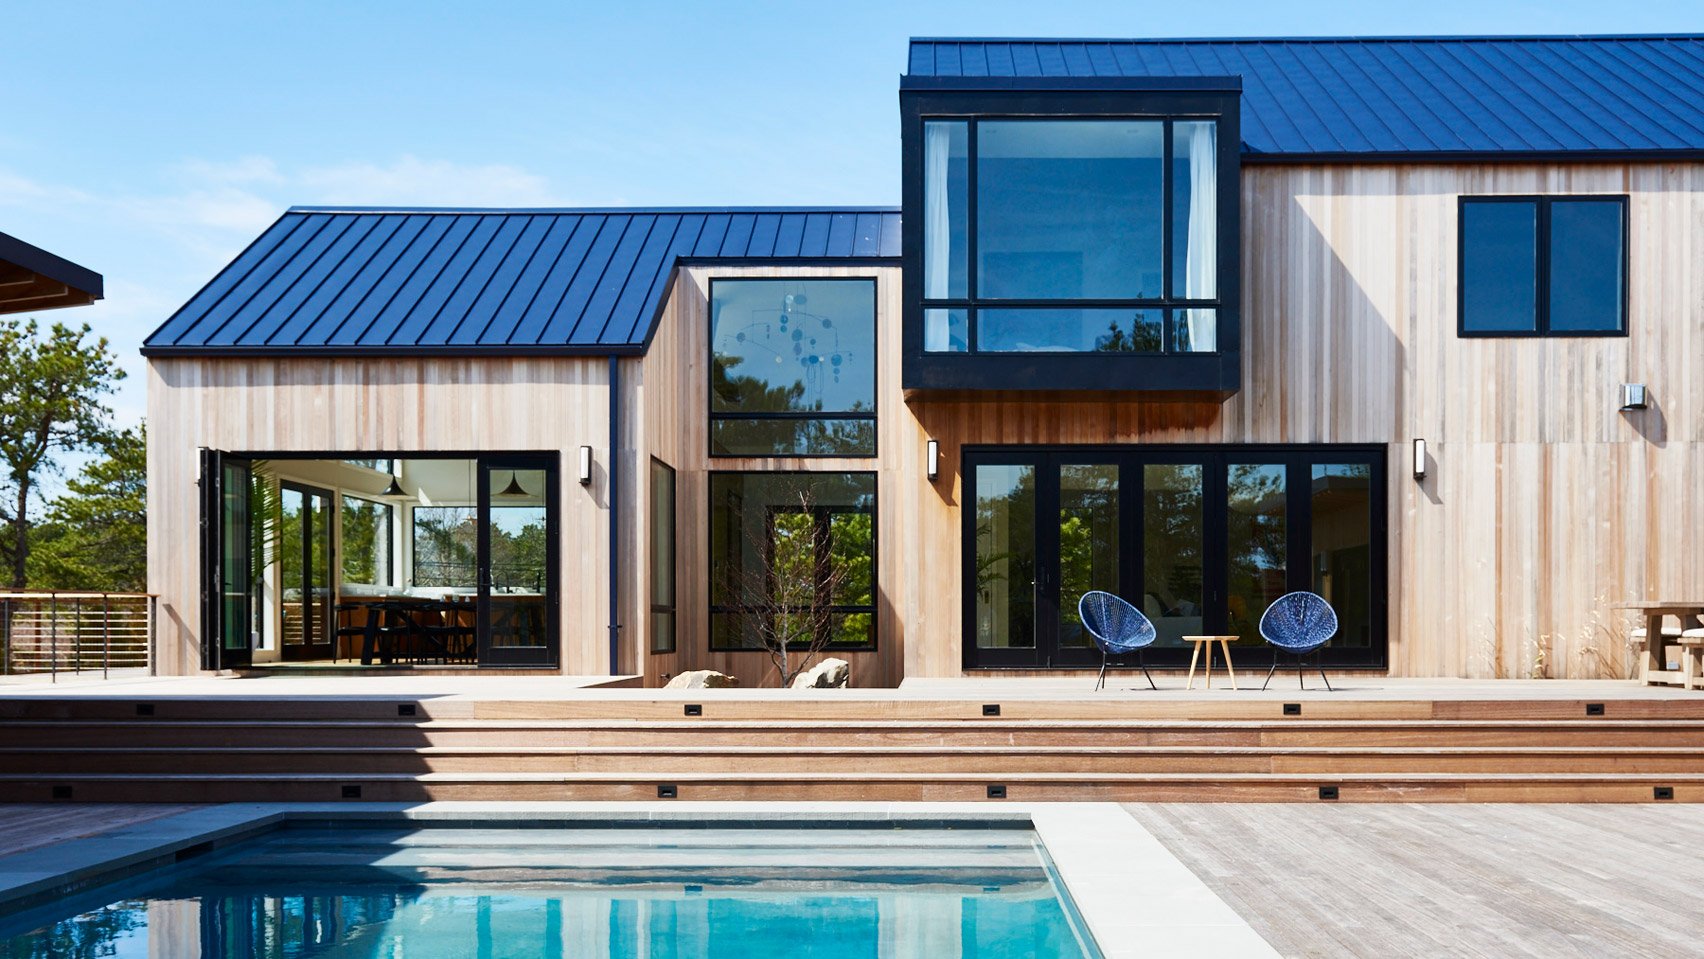 Atelier 216 in Amagansett, the Hamptons, by Studio Zung